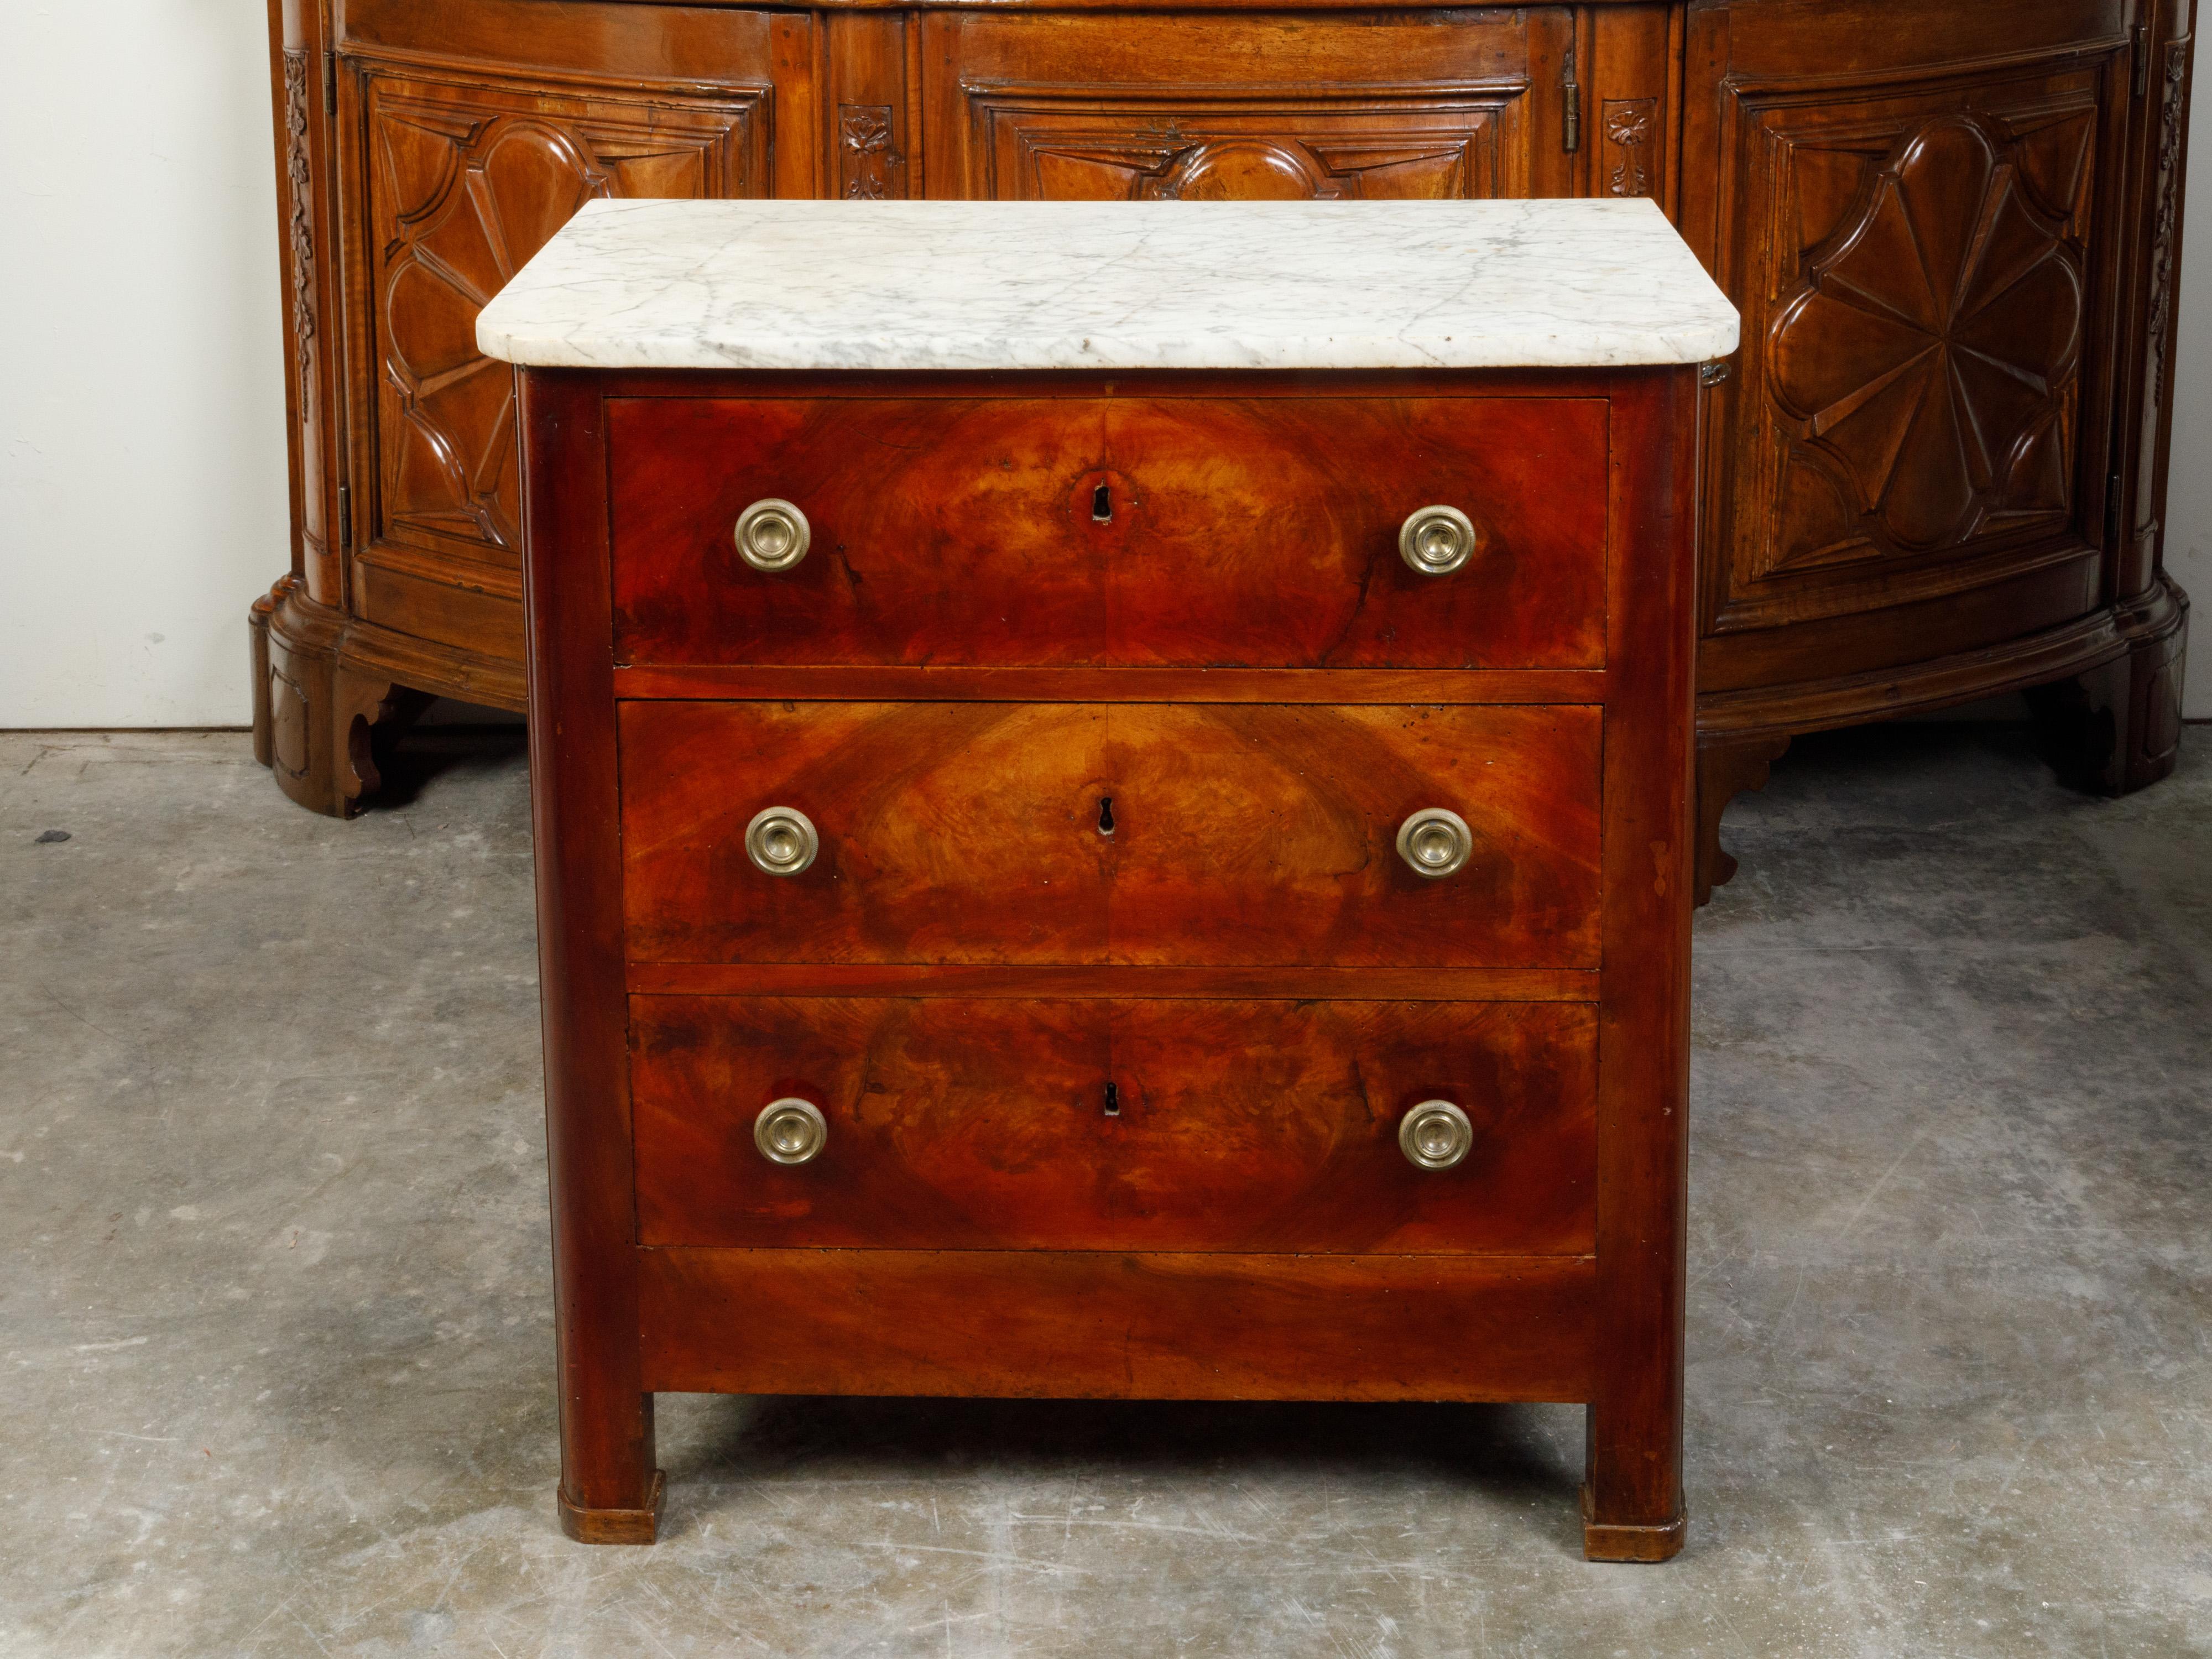 A French walnut commode from the late 19th century, with three drawers and white marble top. Created in France at the end of Emperor Napoléon III's reign, this commode features a white veined rectangular top with rounded corners in the front,